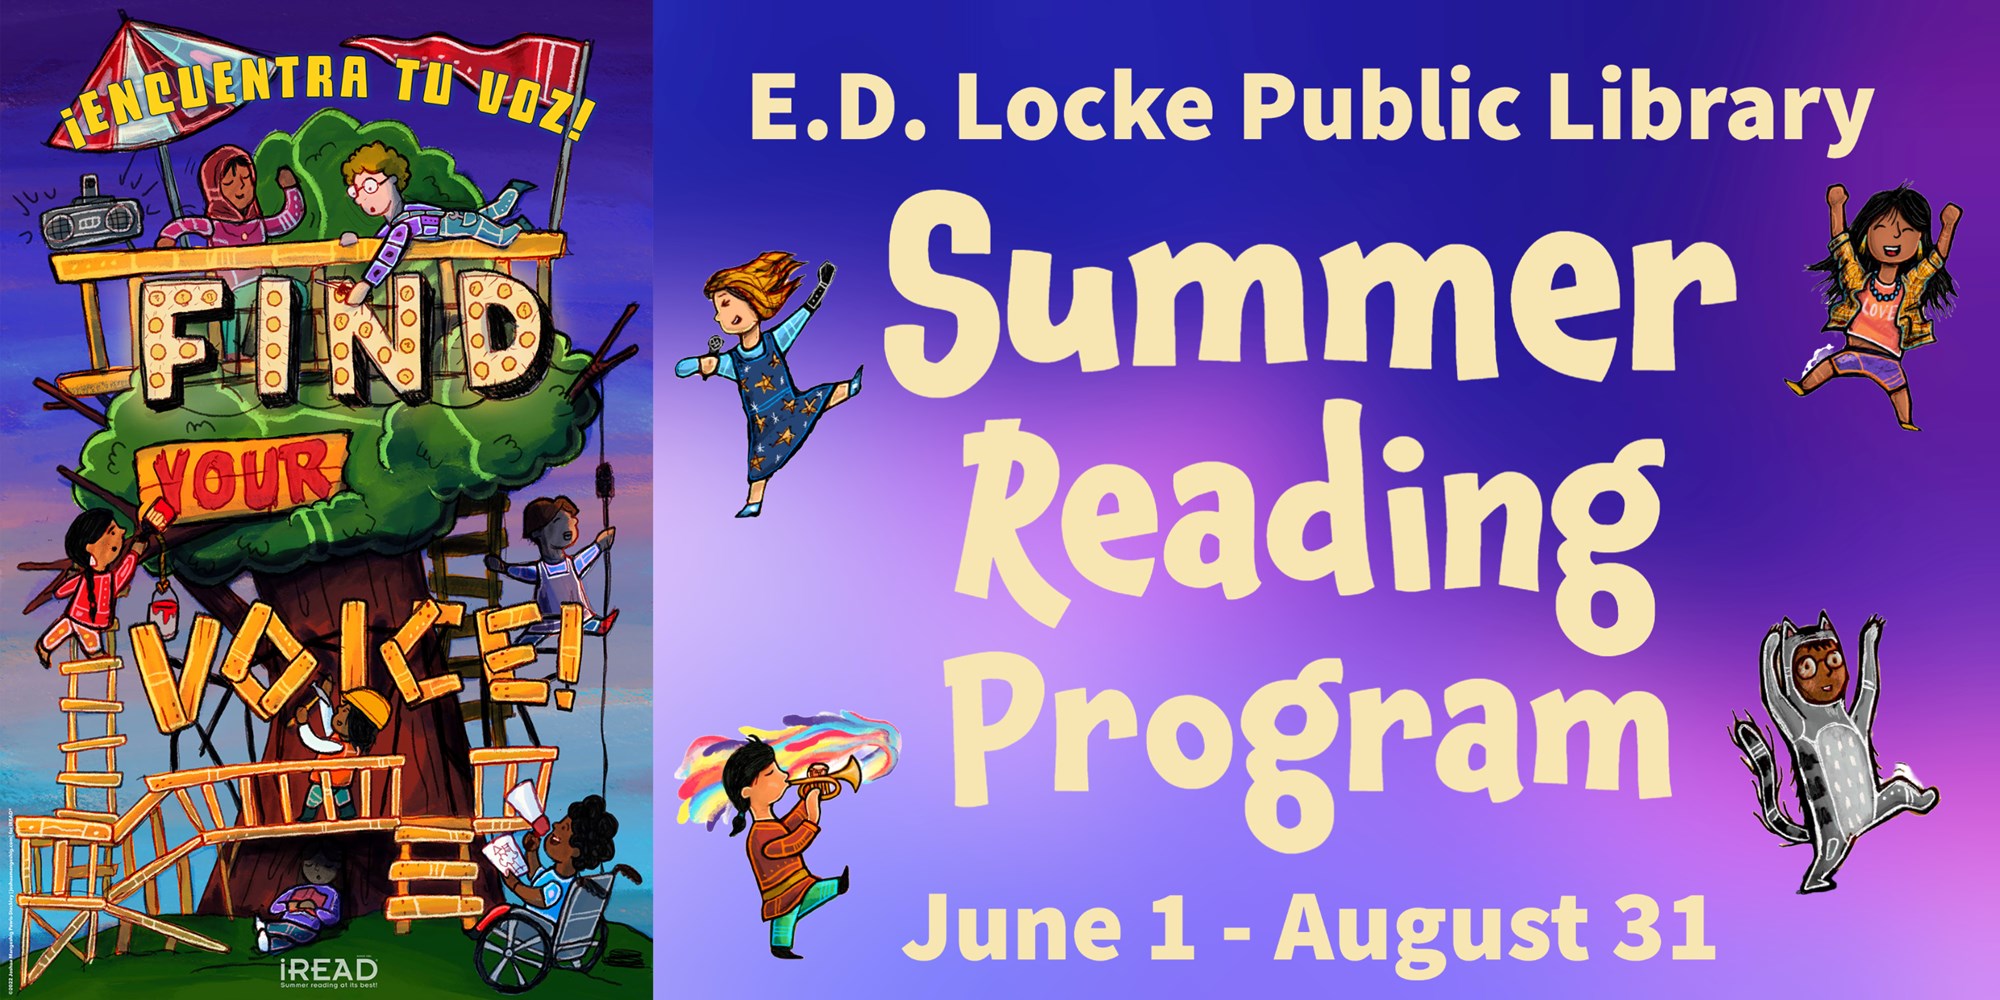 Summer Reading Program. June 1 - August 31. Image of illustrated children playing in a tree.